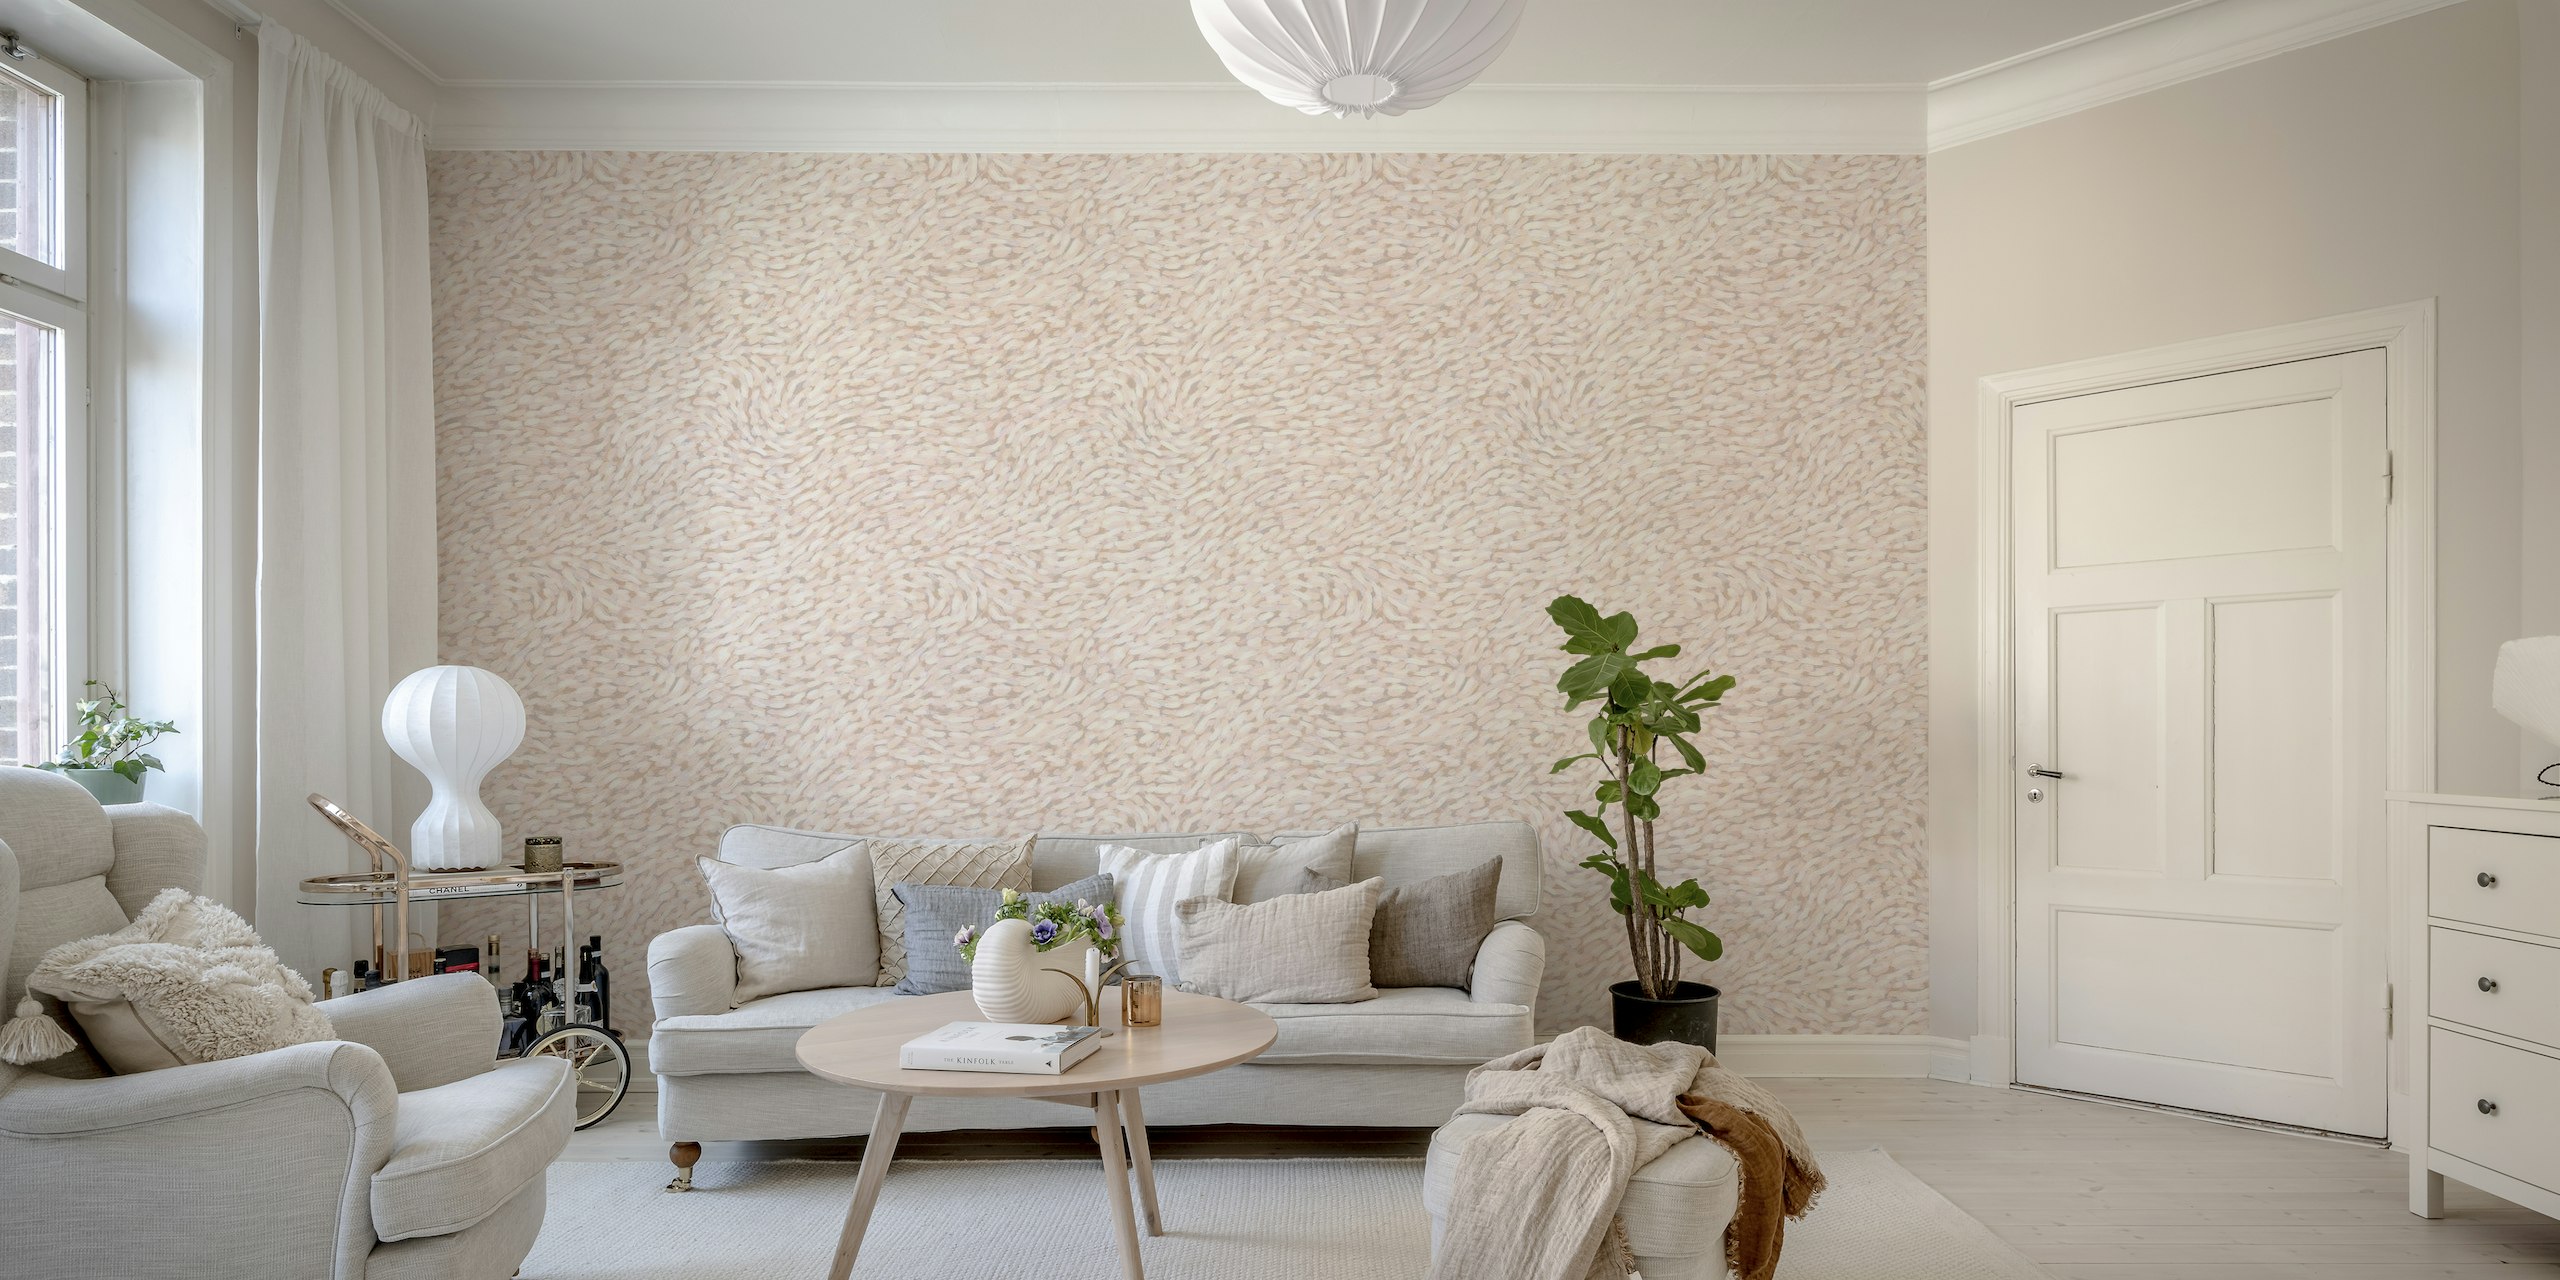 Flow - Peach wall mural with a textured abstract pattern in soft peach tones